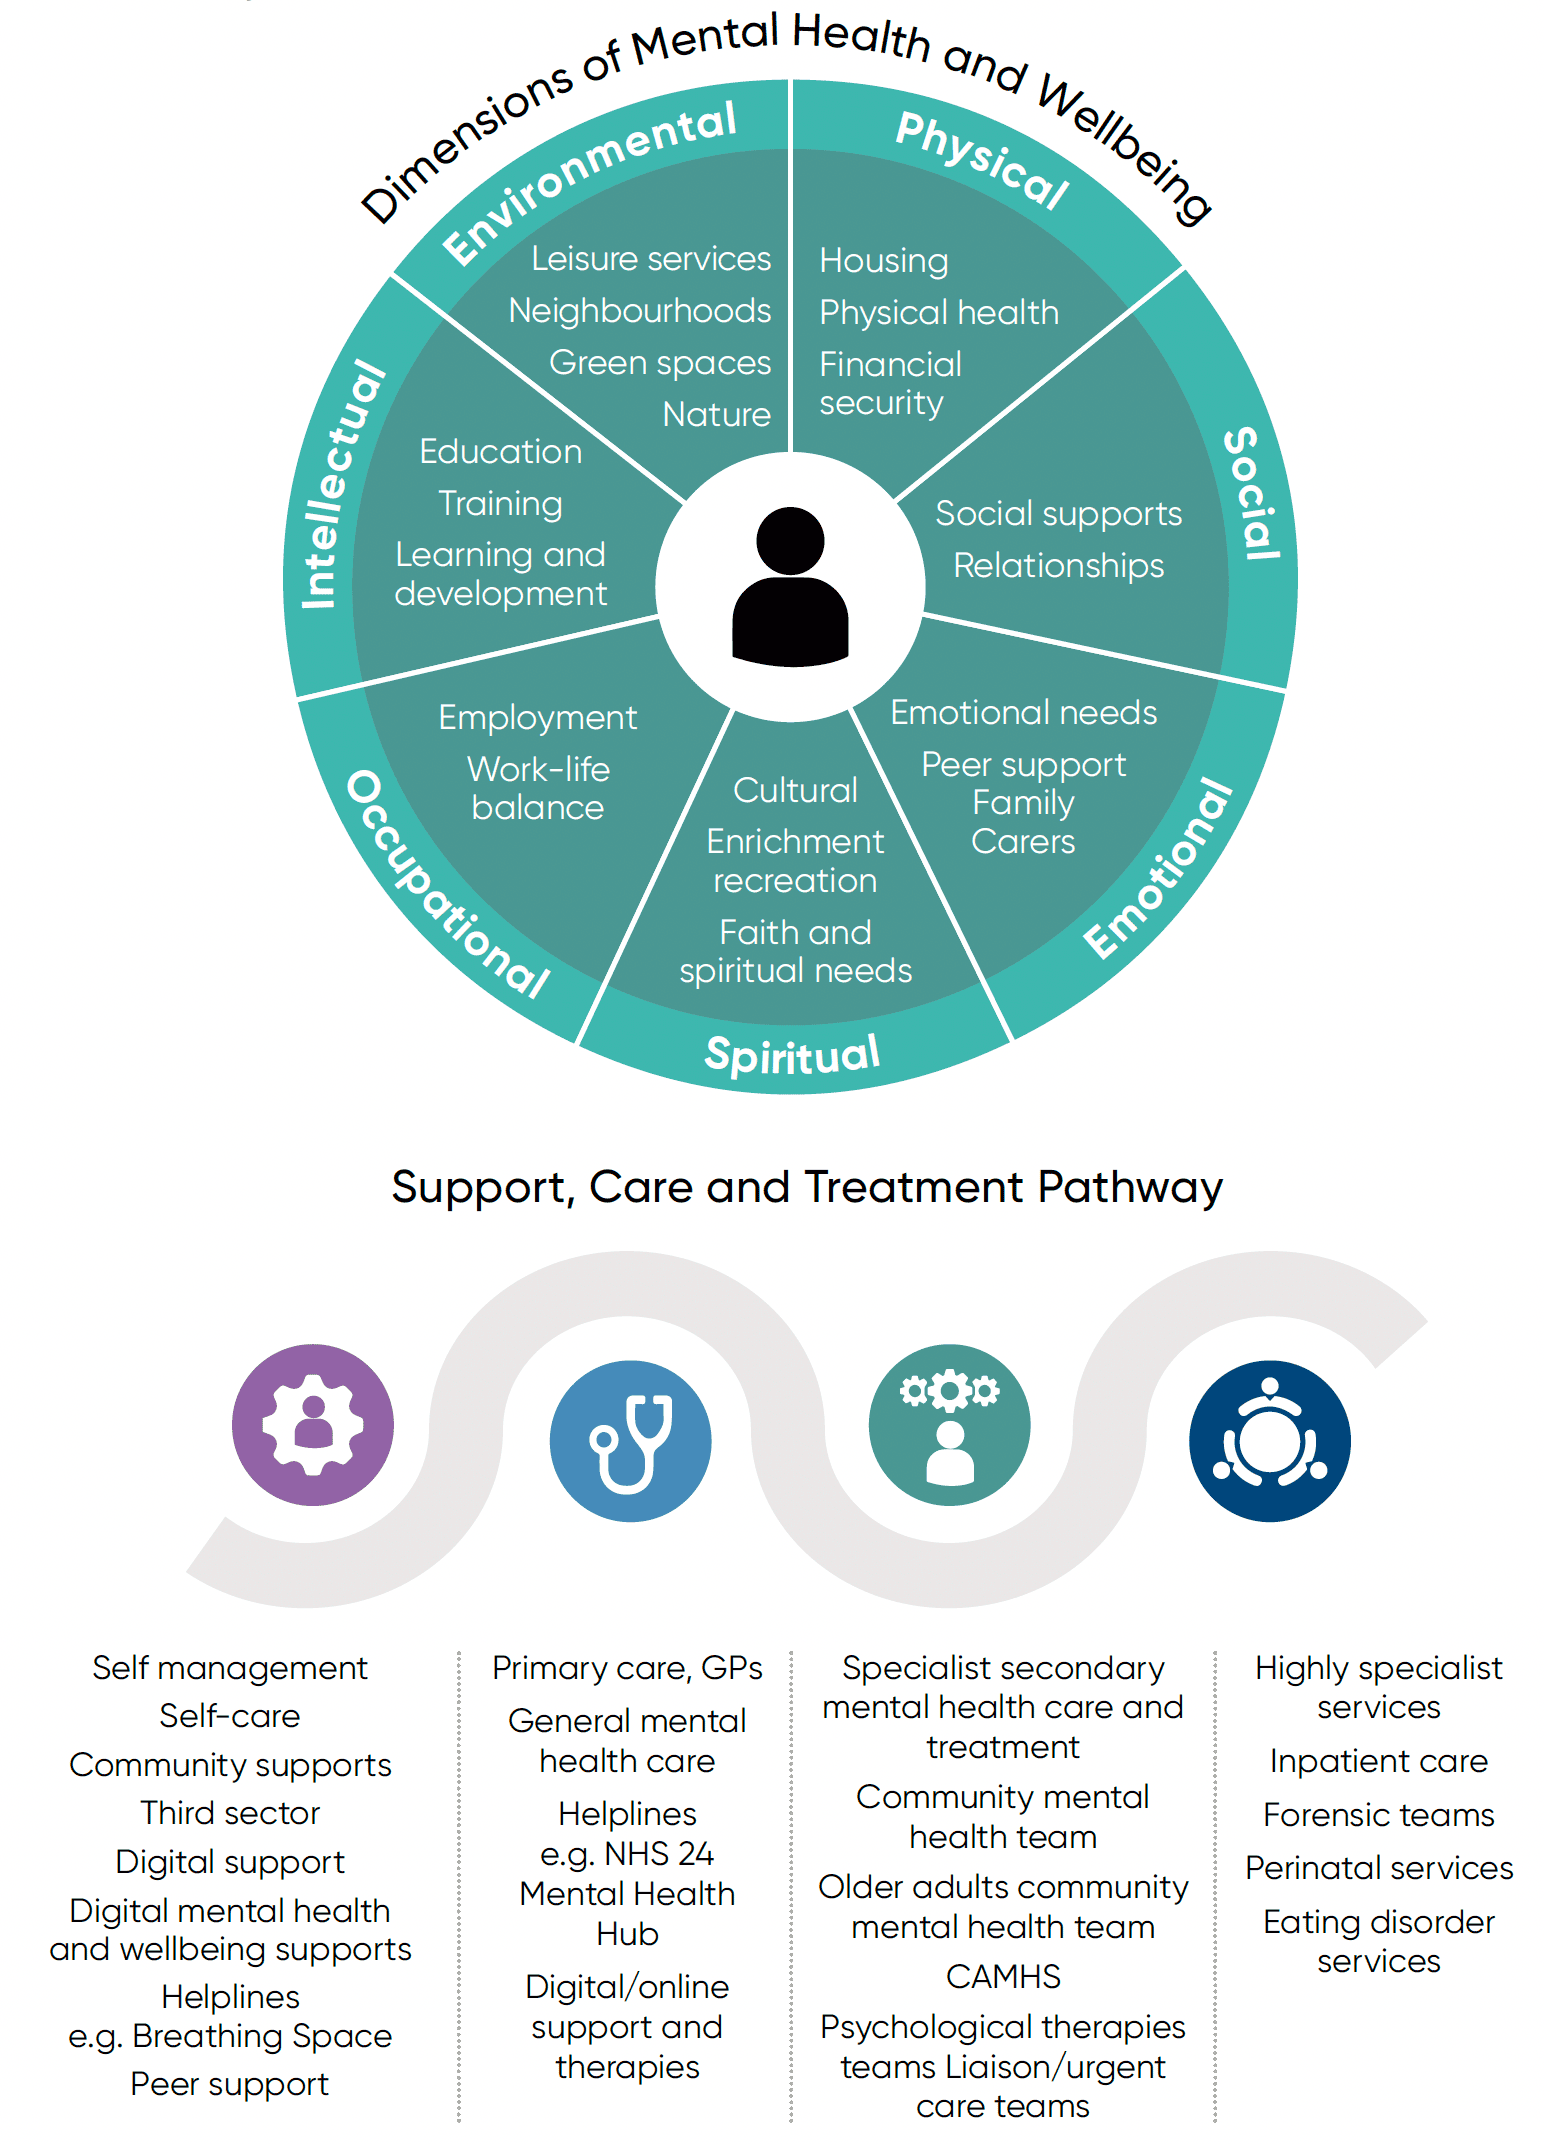 The top part of the model shows the various dimensions of mental health including physical, social, emotional, spiritual, occupational, intellectual and environmental. 
The bottom part of the model shows mental health support, care and treatment options, including peer support, GPs, CAMHS and specialist services.